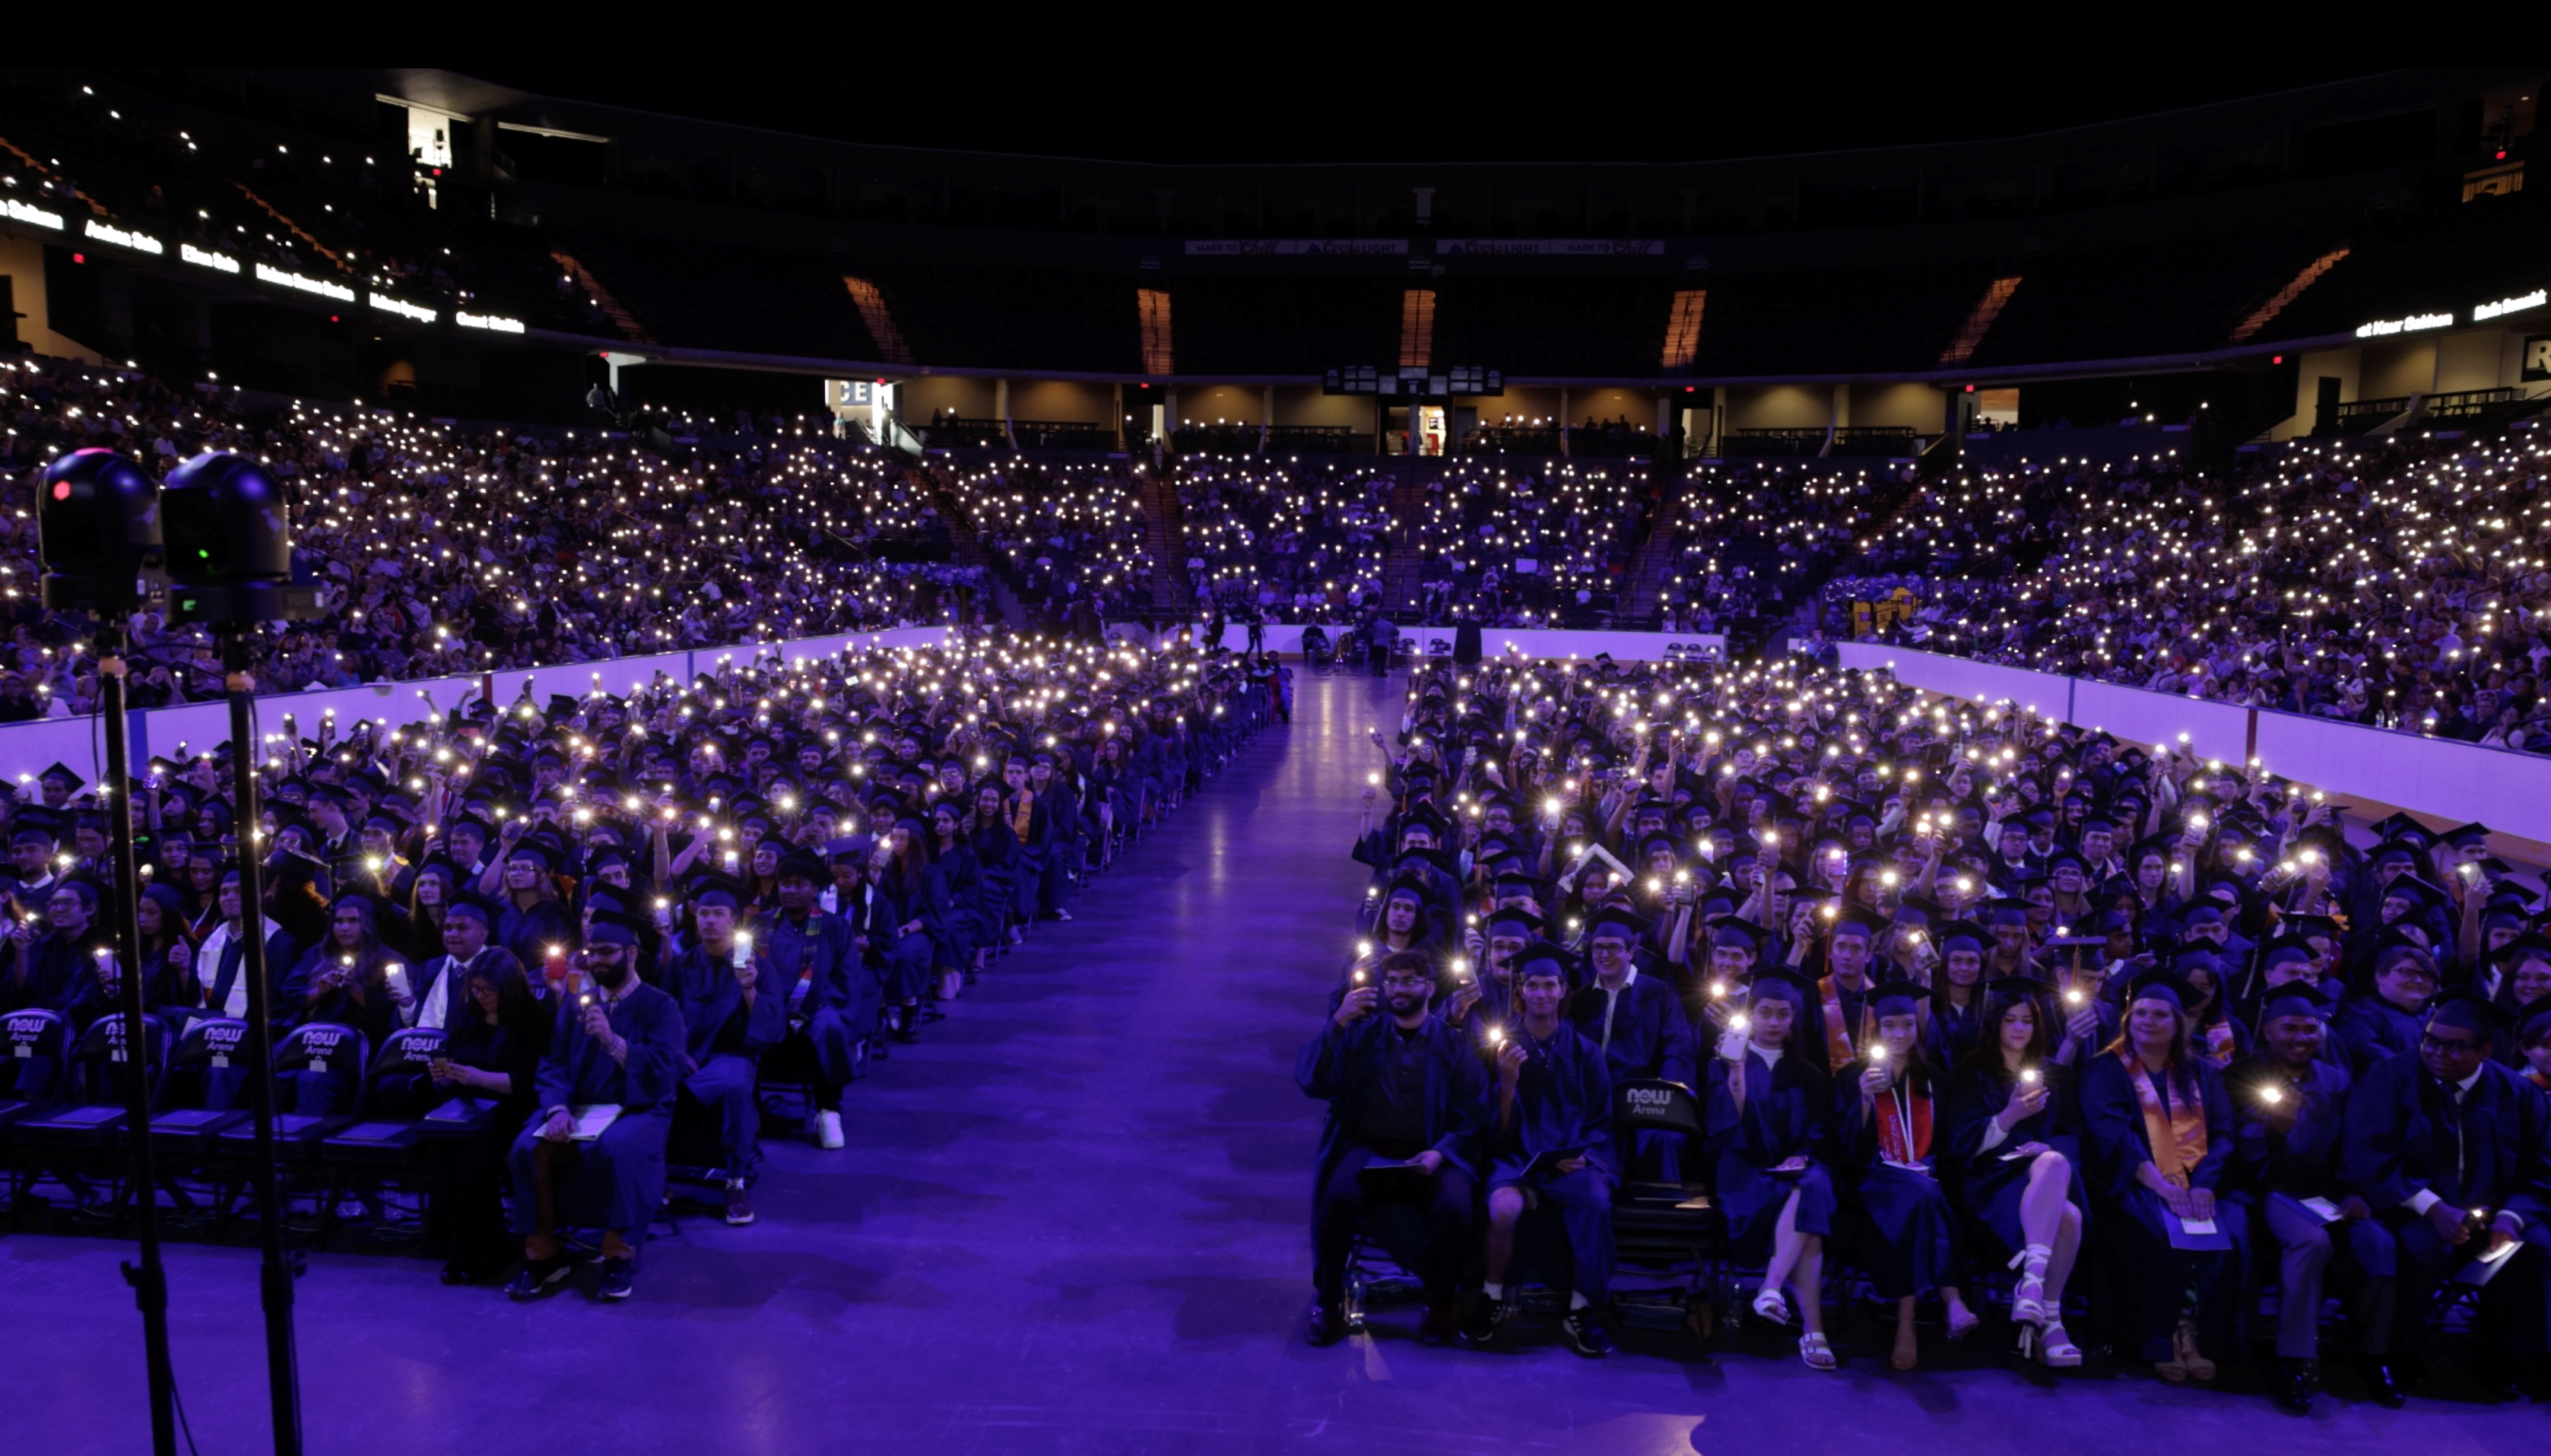 Graduates hold cell phone lights in darkened arena